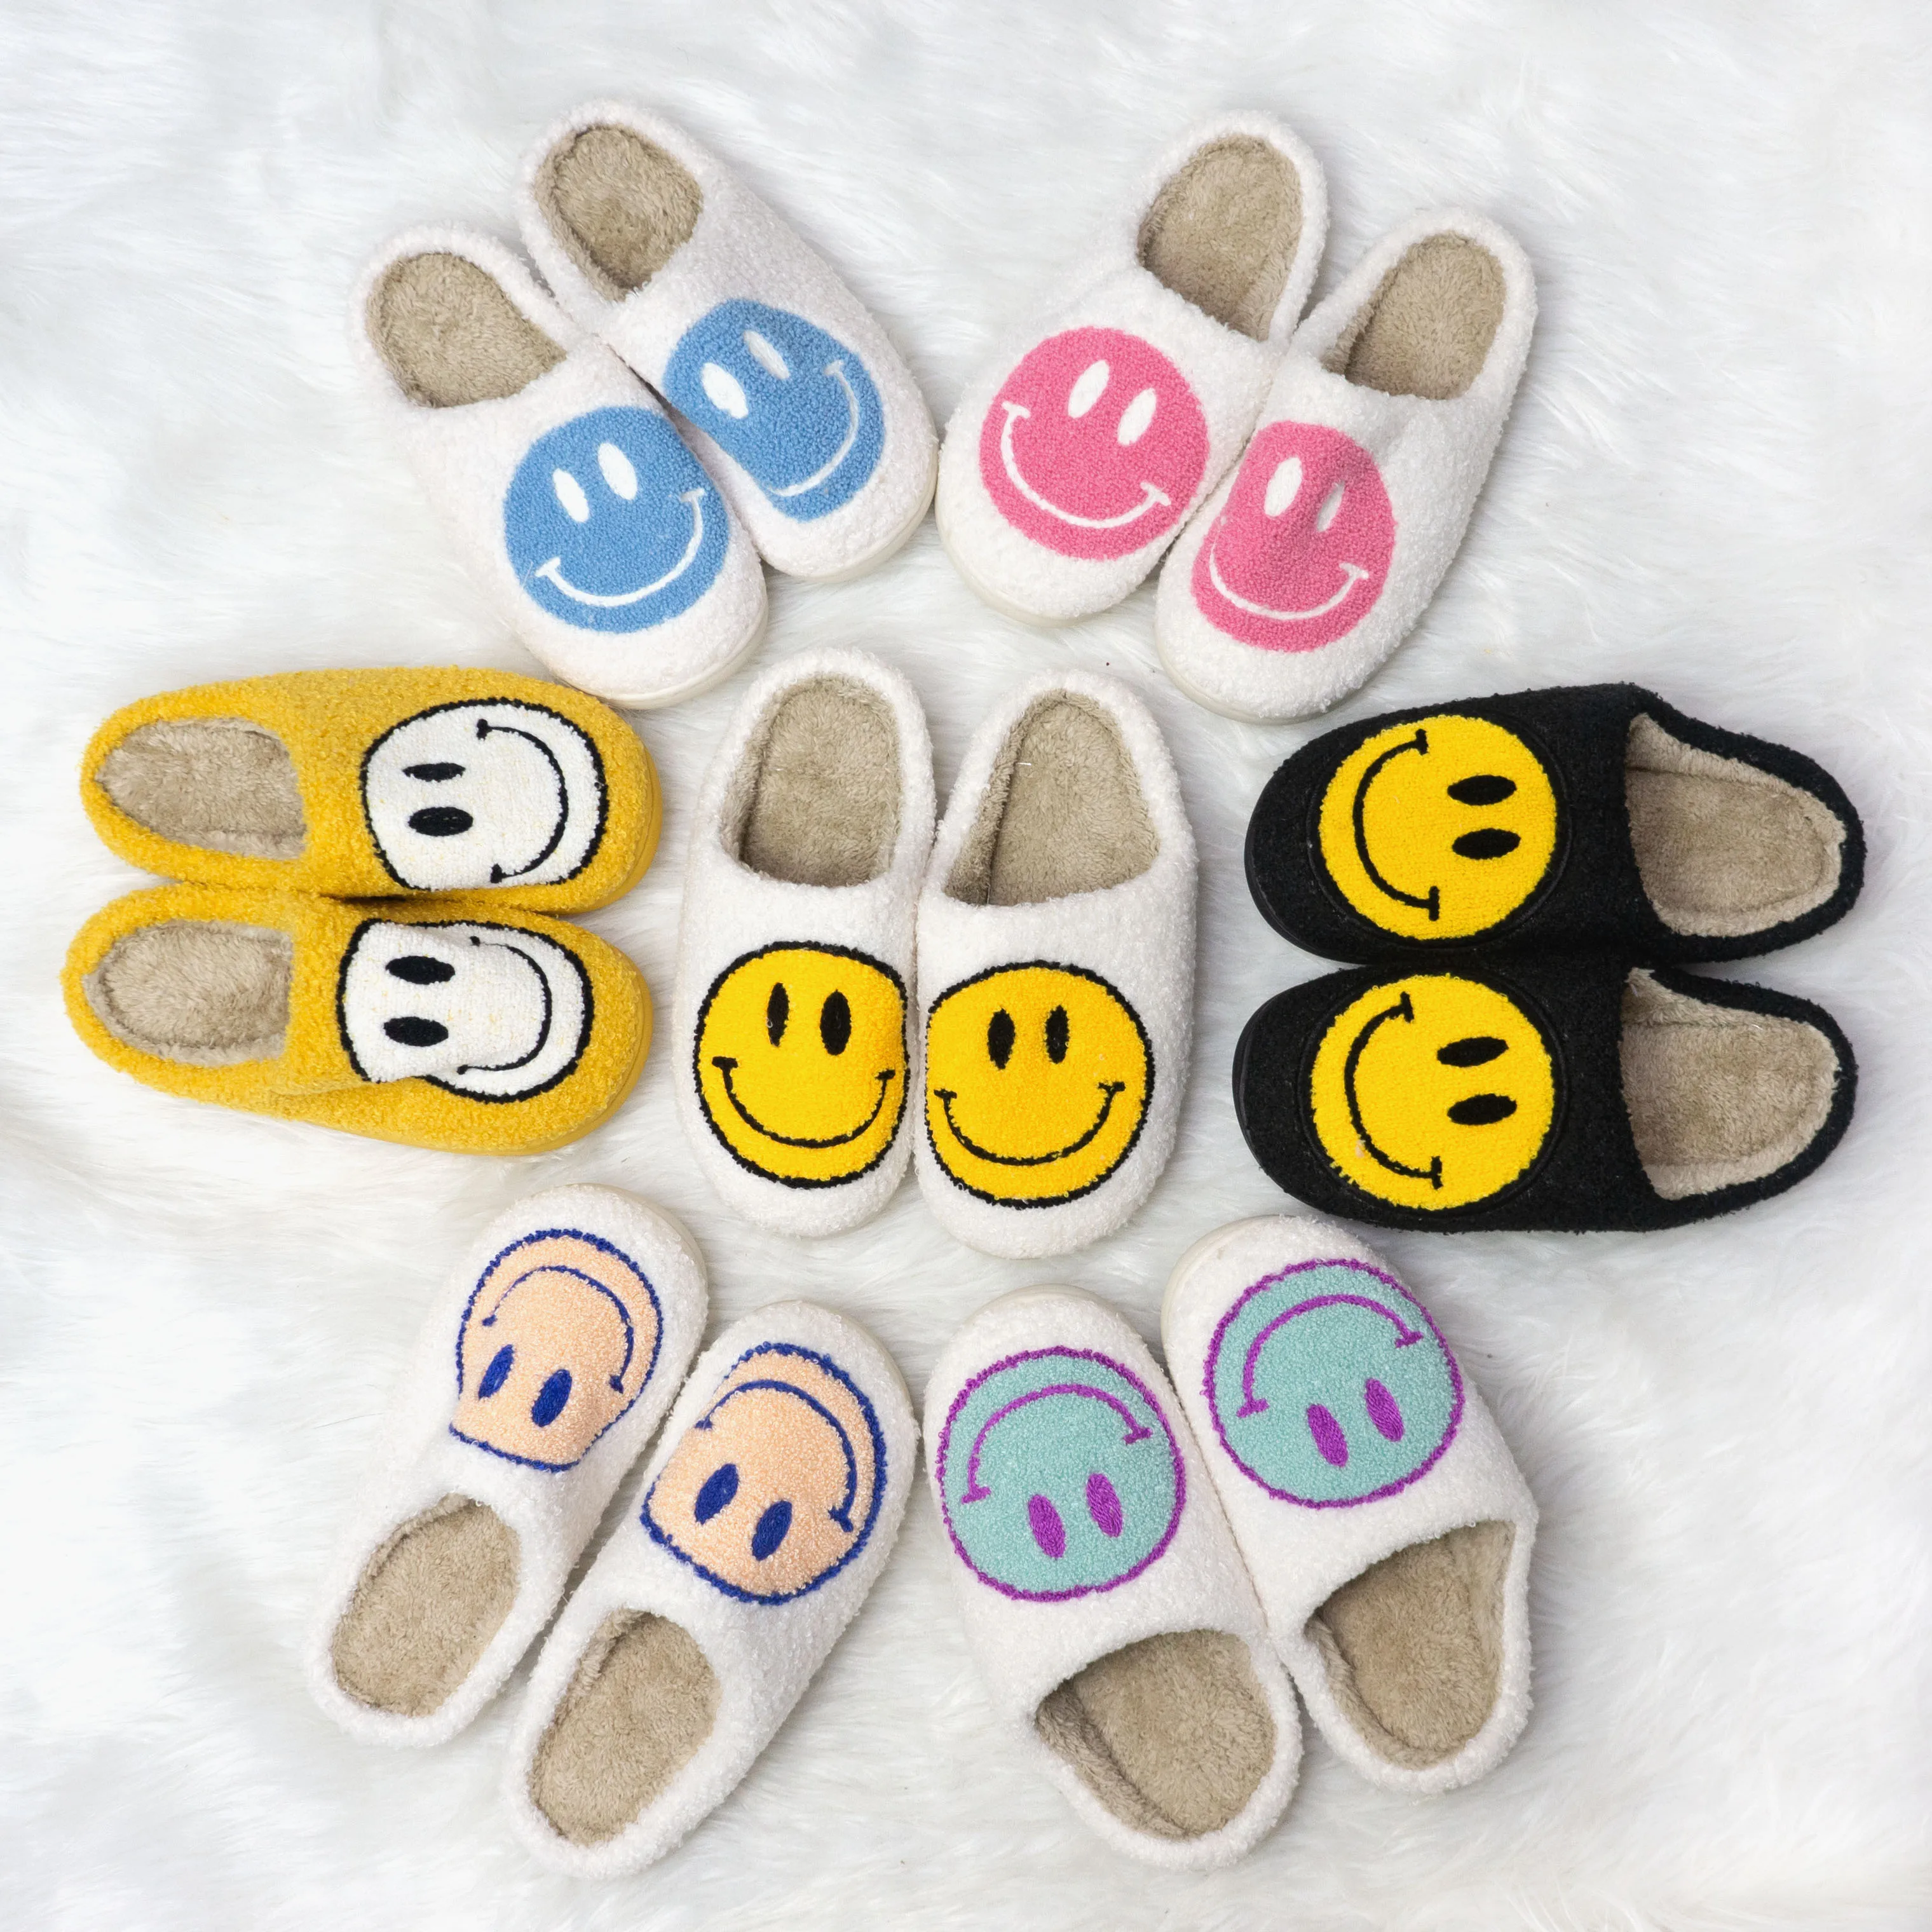 

Cute Carton Cotton Bedroom House Slippers Smile Face Plush Toy Happy Smiley Face Slippers Fur Slides Slippers For Women Ladies